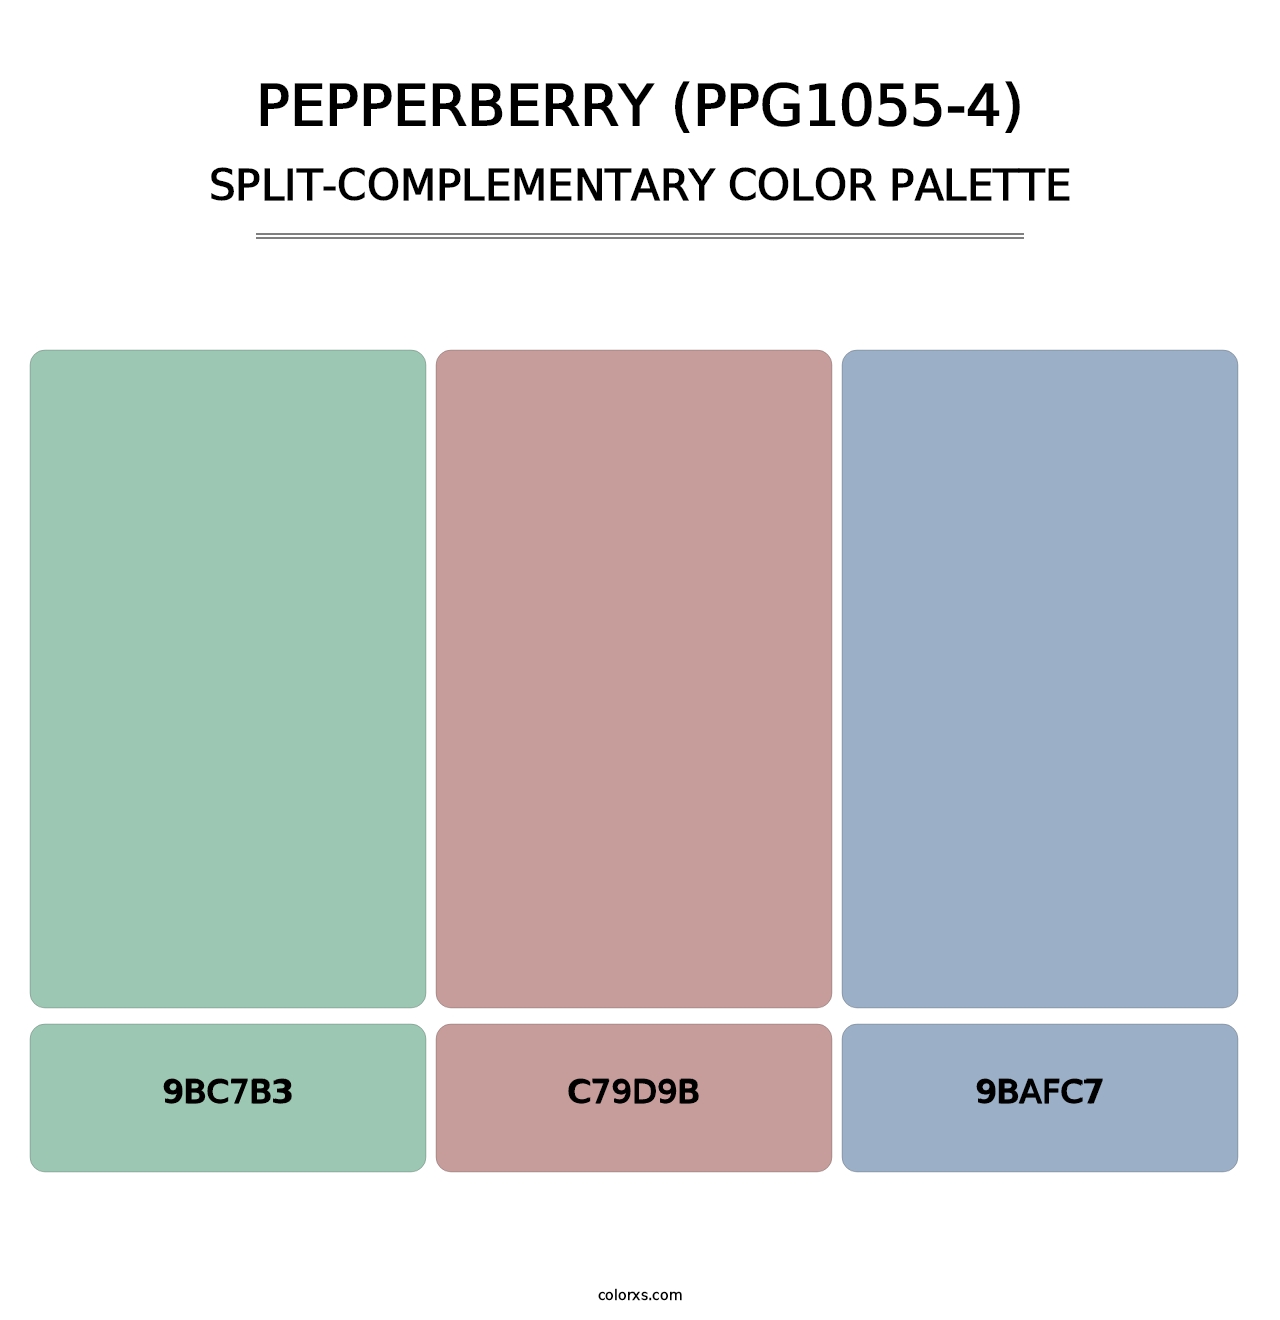 Pepperberry (PPG1055-4) - Split-Complementary Color Palette